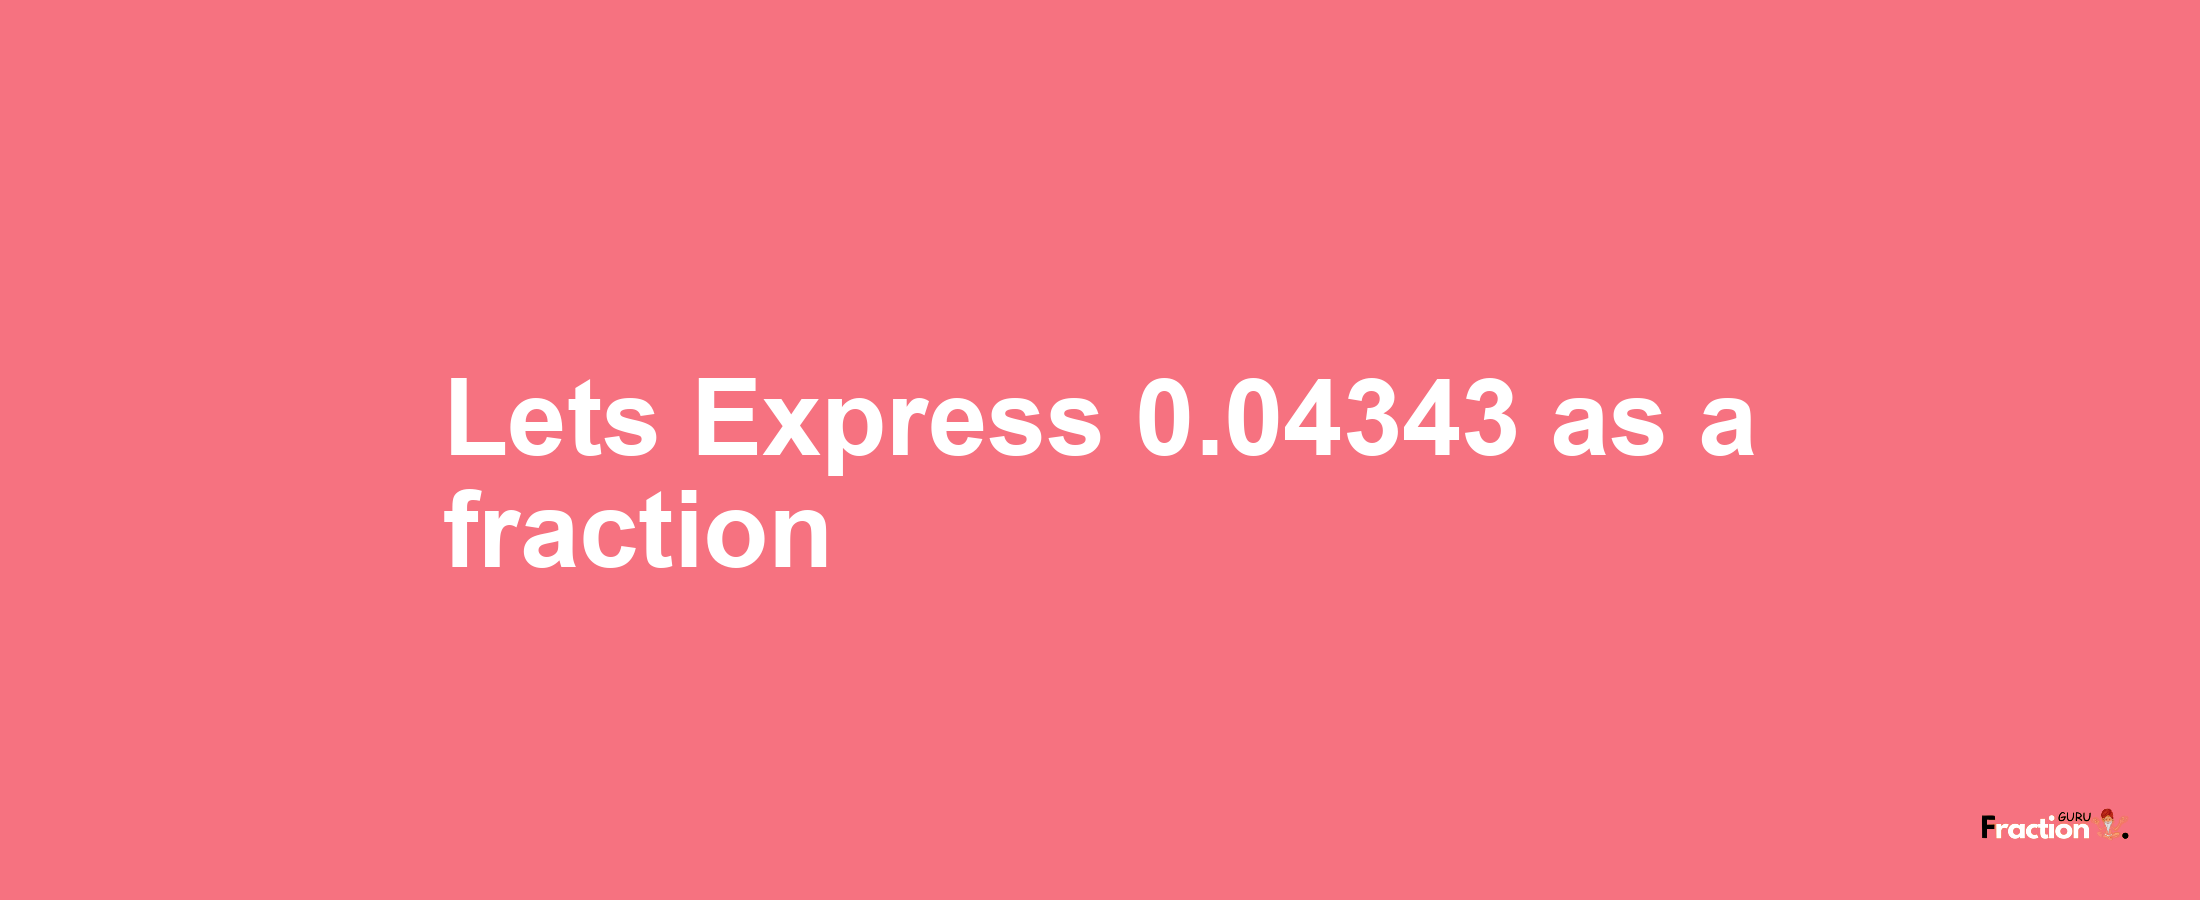 Lets Express 0.04343 as afraction